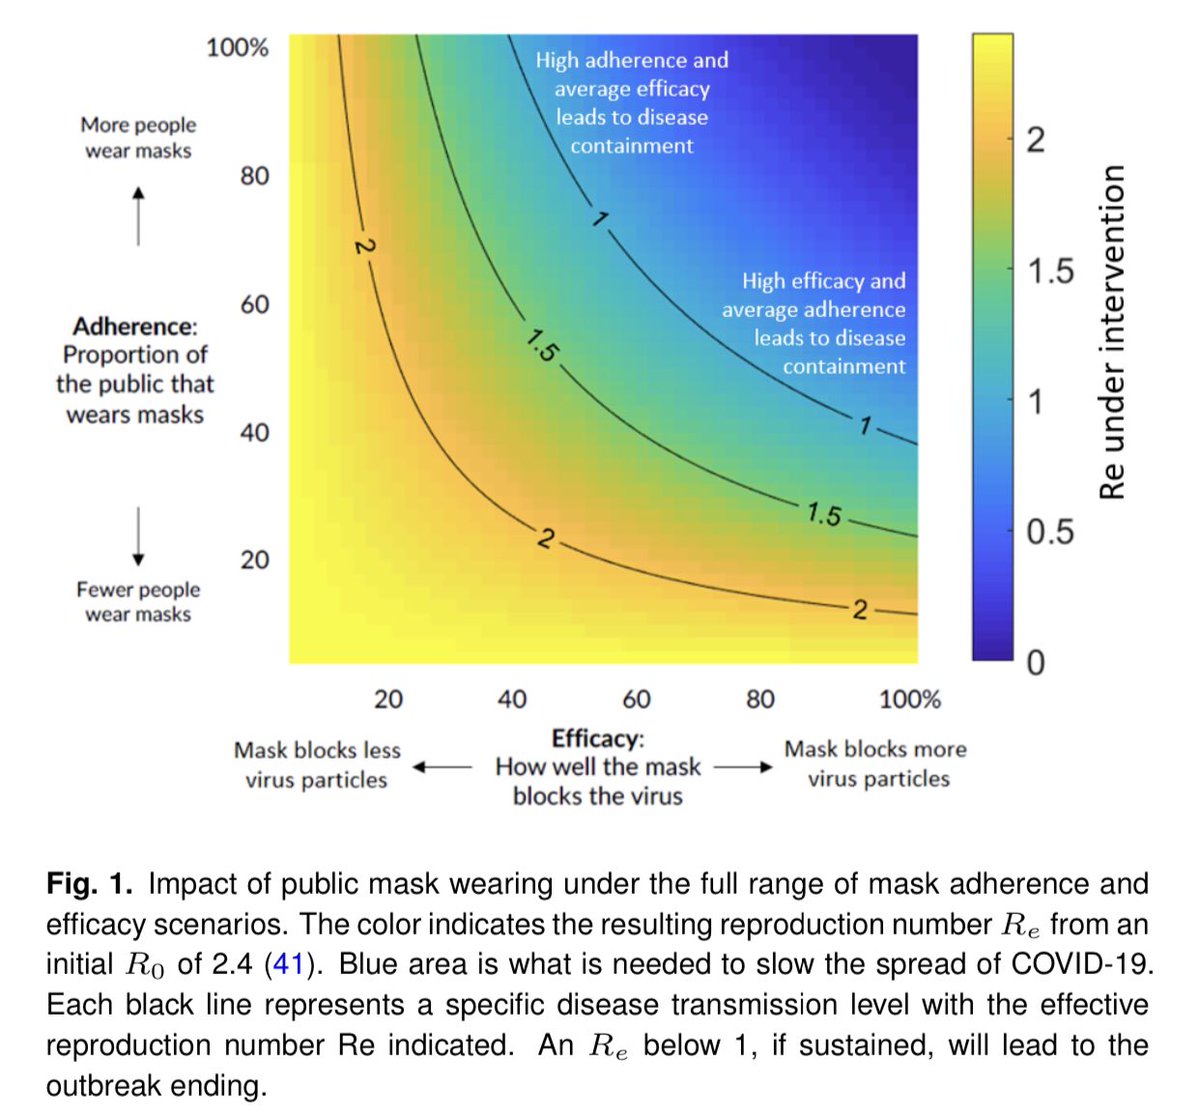 4) A big scientific evidence review study on face masks. “We recommend that public officials and governments strongly encourage the use of widespread face masks in public, including the use of appropriate regulation.” #COVID19 europepmc.org/article/PPR/PP…